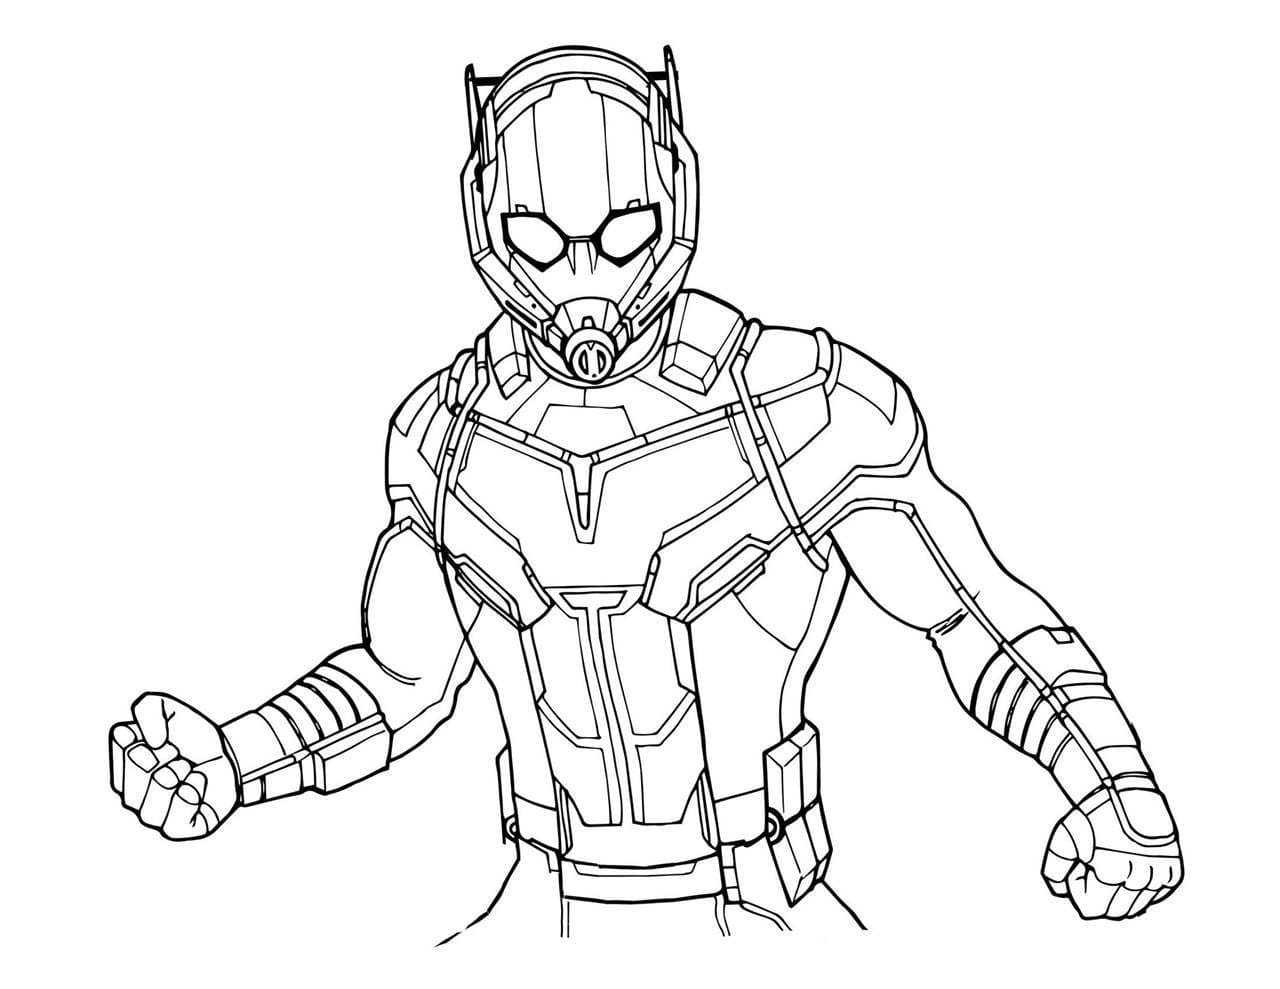 Ant Man 20 Coloring Page   Free Printable Coloring Pages for Kids